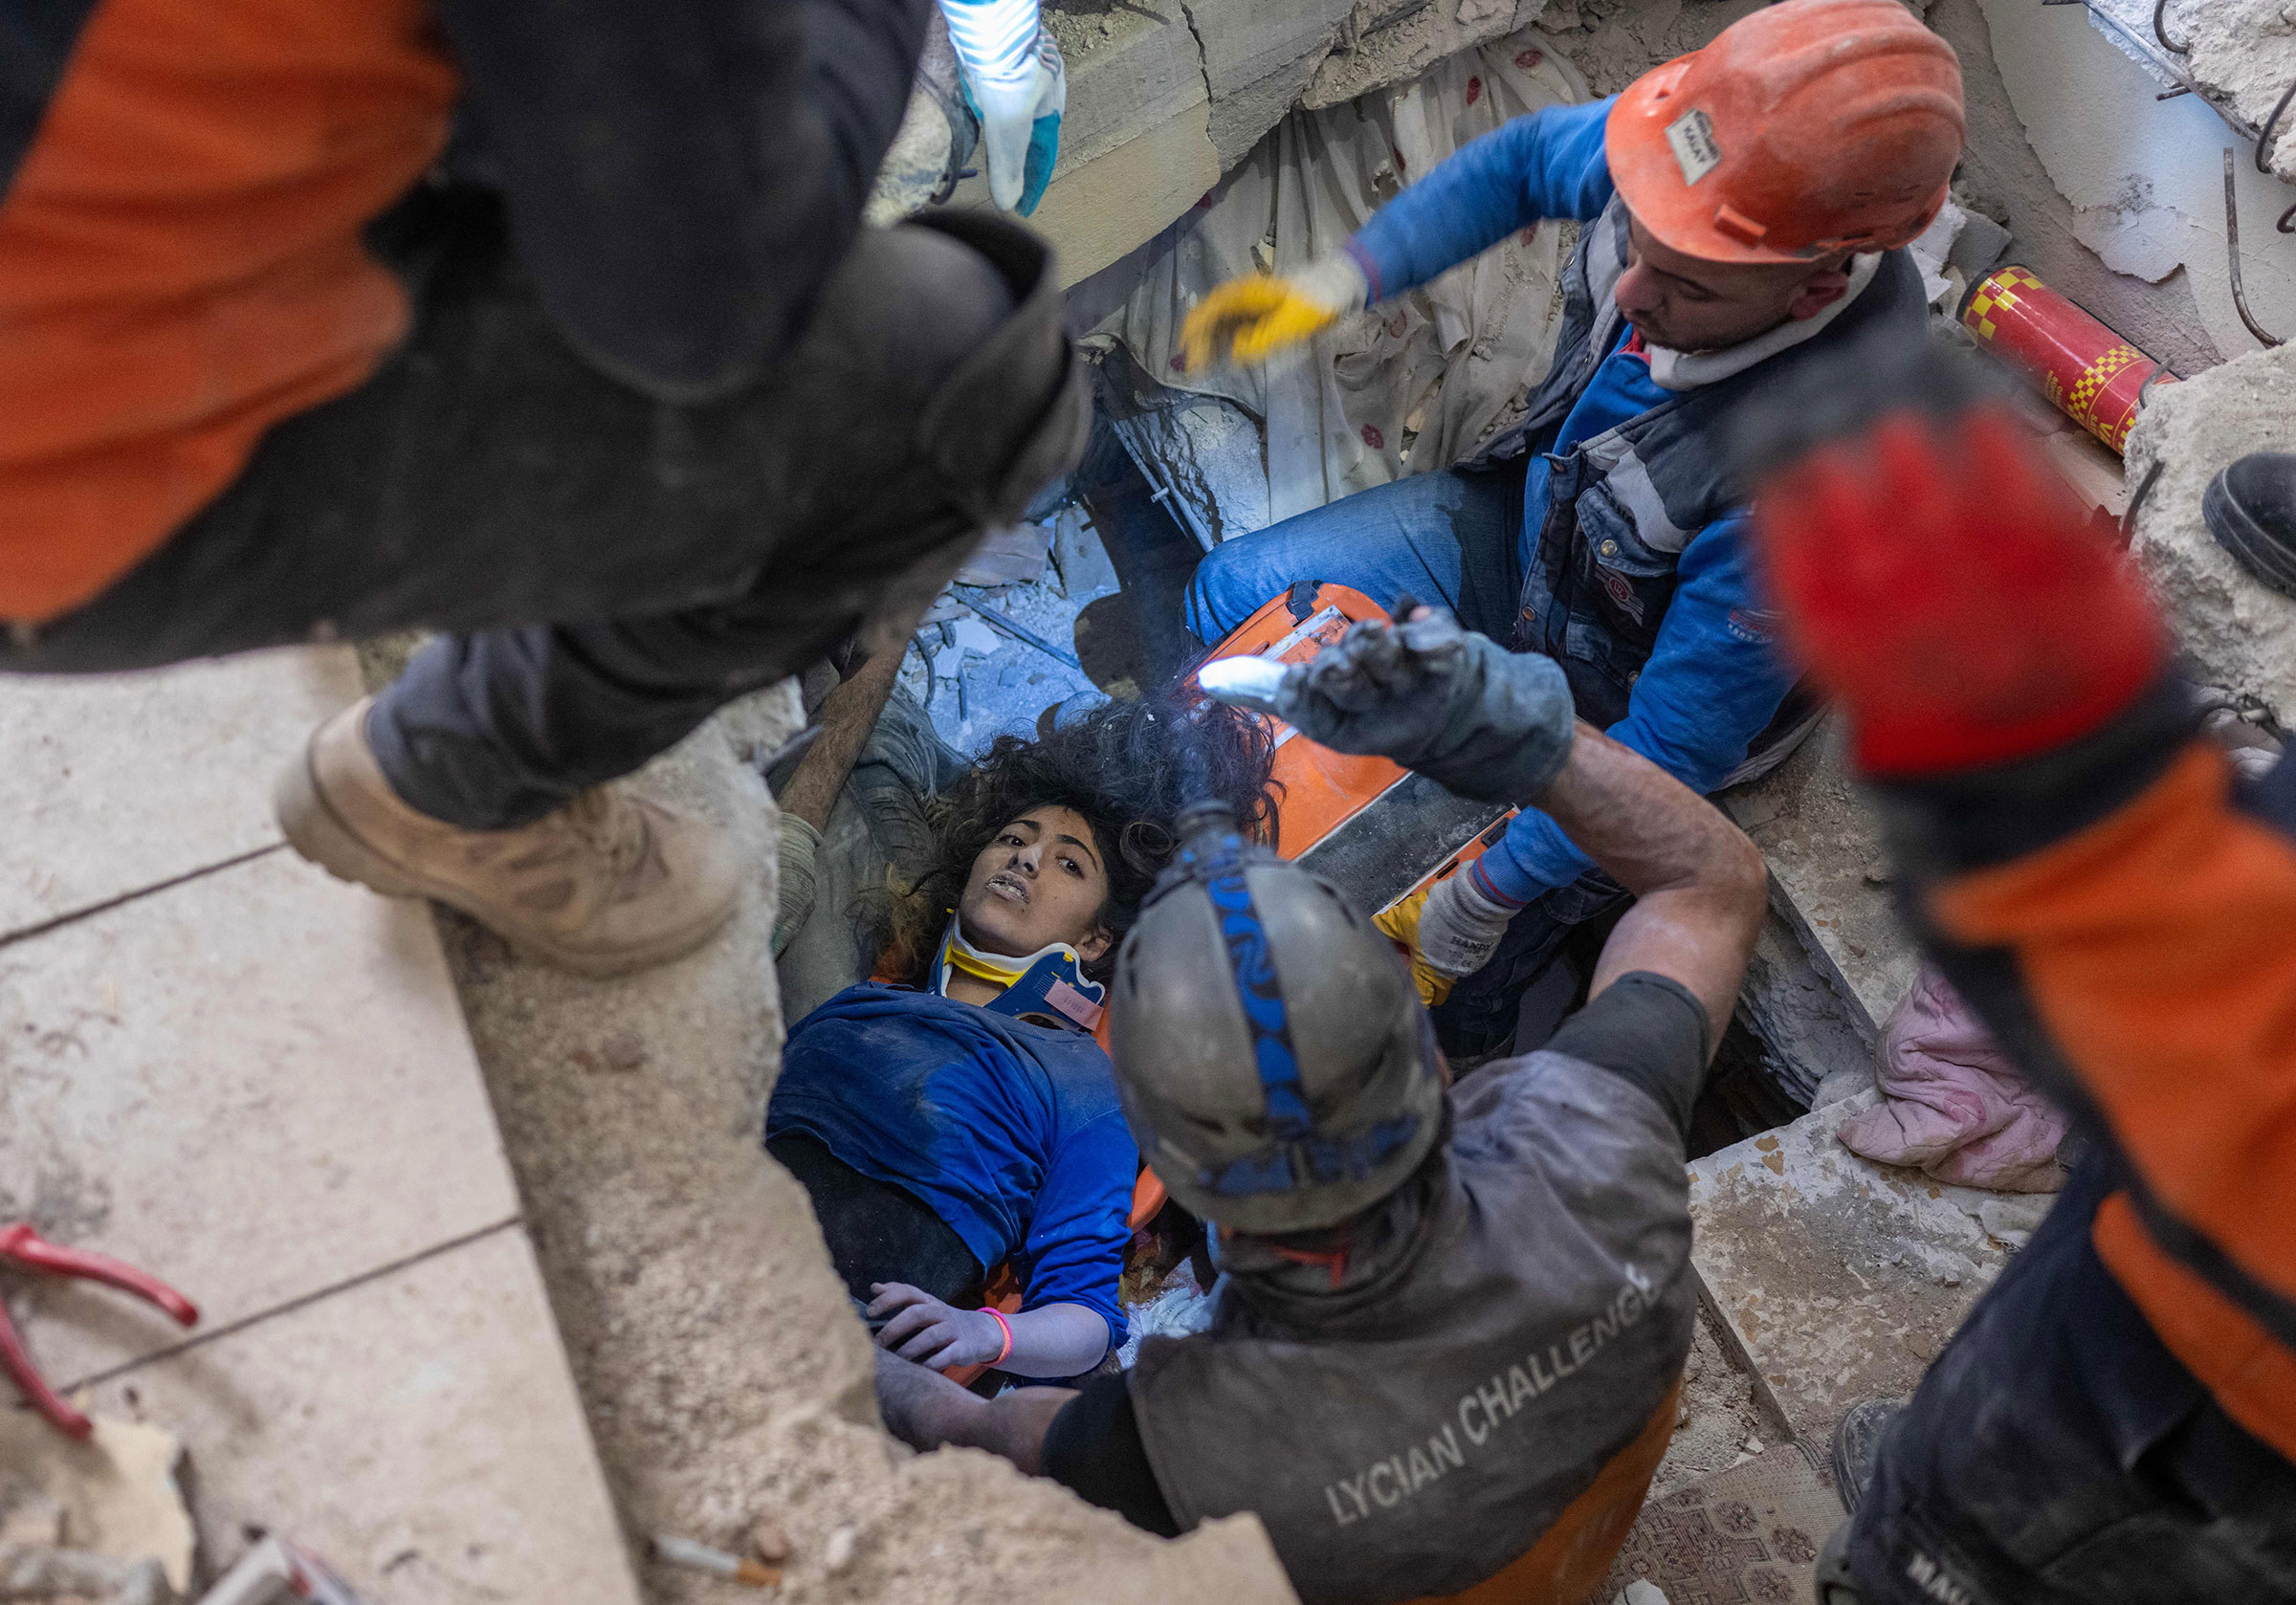 Emergency personnel conduct a rescue operation to save 16-year-old Melda from the rubble of a collapsed building in Hatay, southern Turkey, on Feb. 9, 2023, where she has been trapped since a 7.8-magnitude earthquake struck the country's south-east.